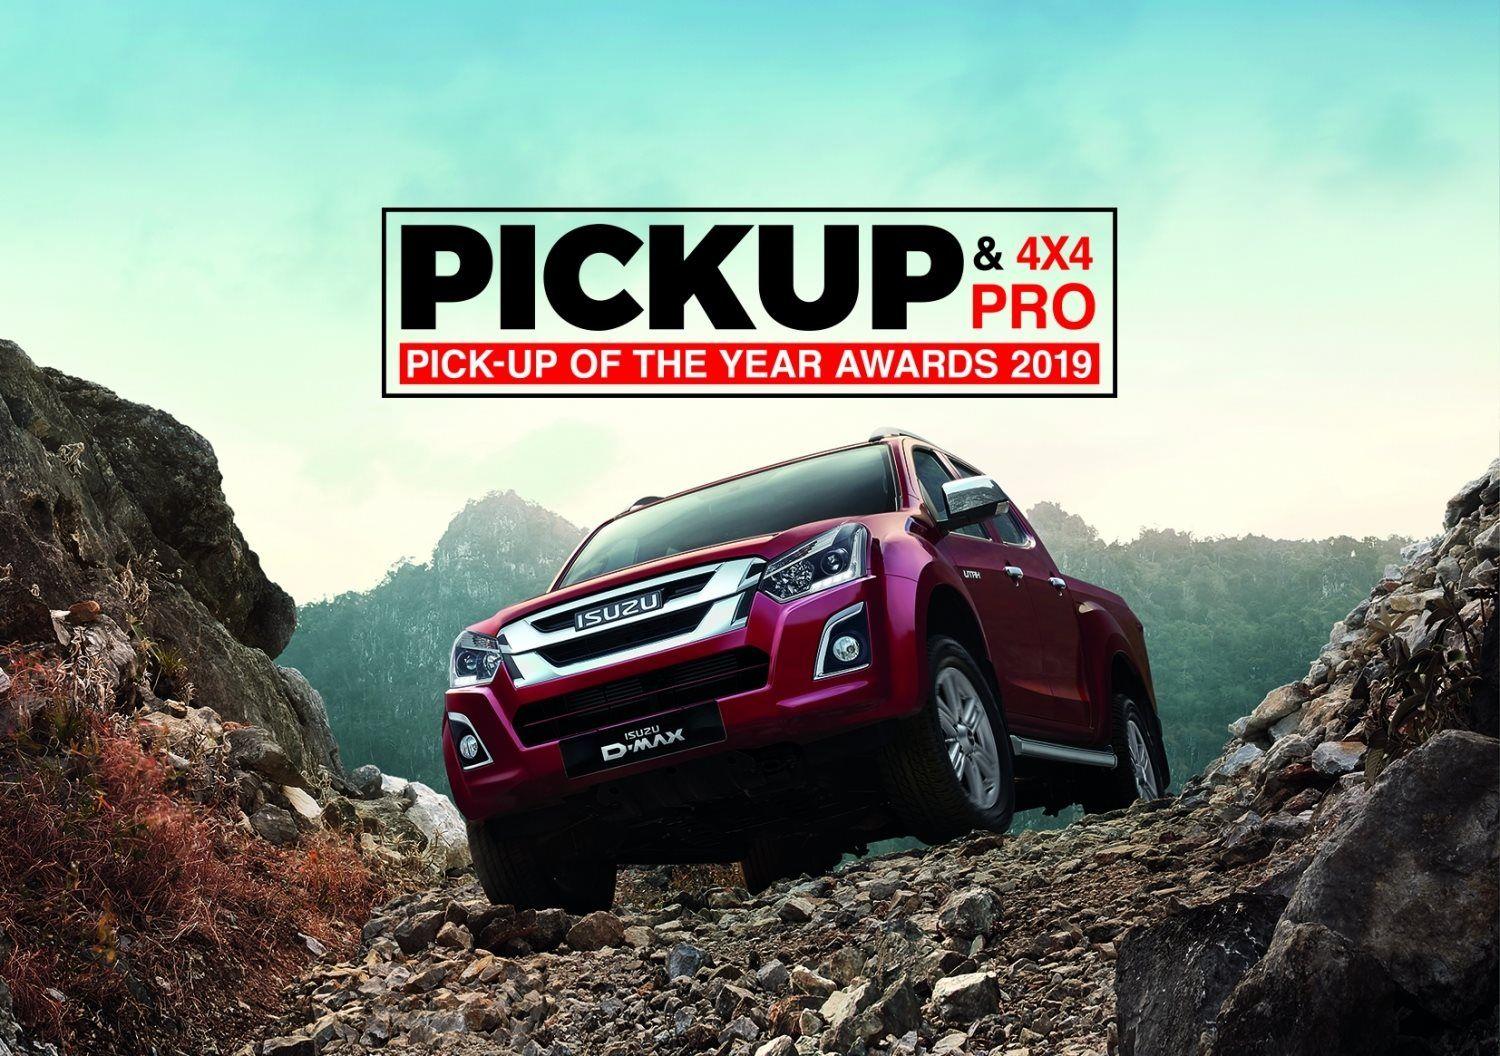 THE ISUZU D-MAX PICKS-UP YET ANOTHER AWARD IN 2019!